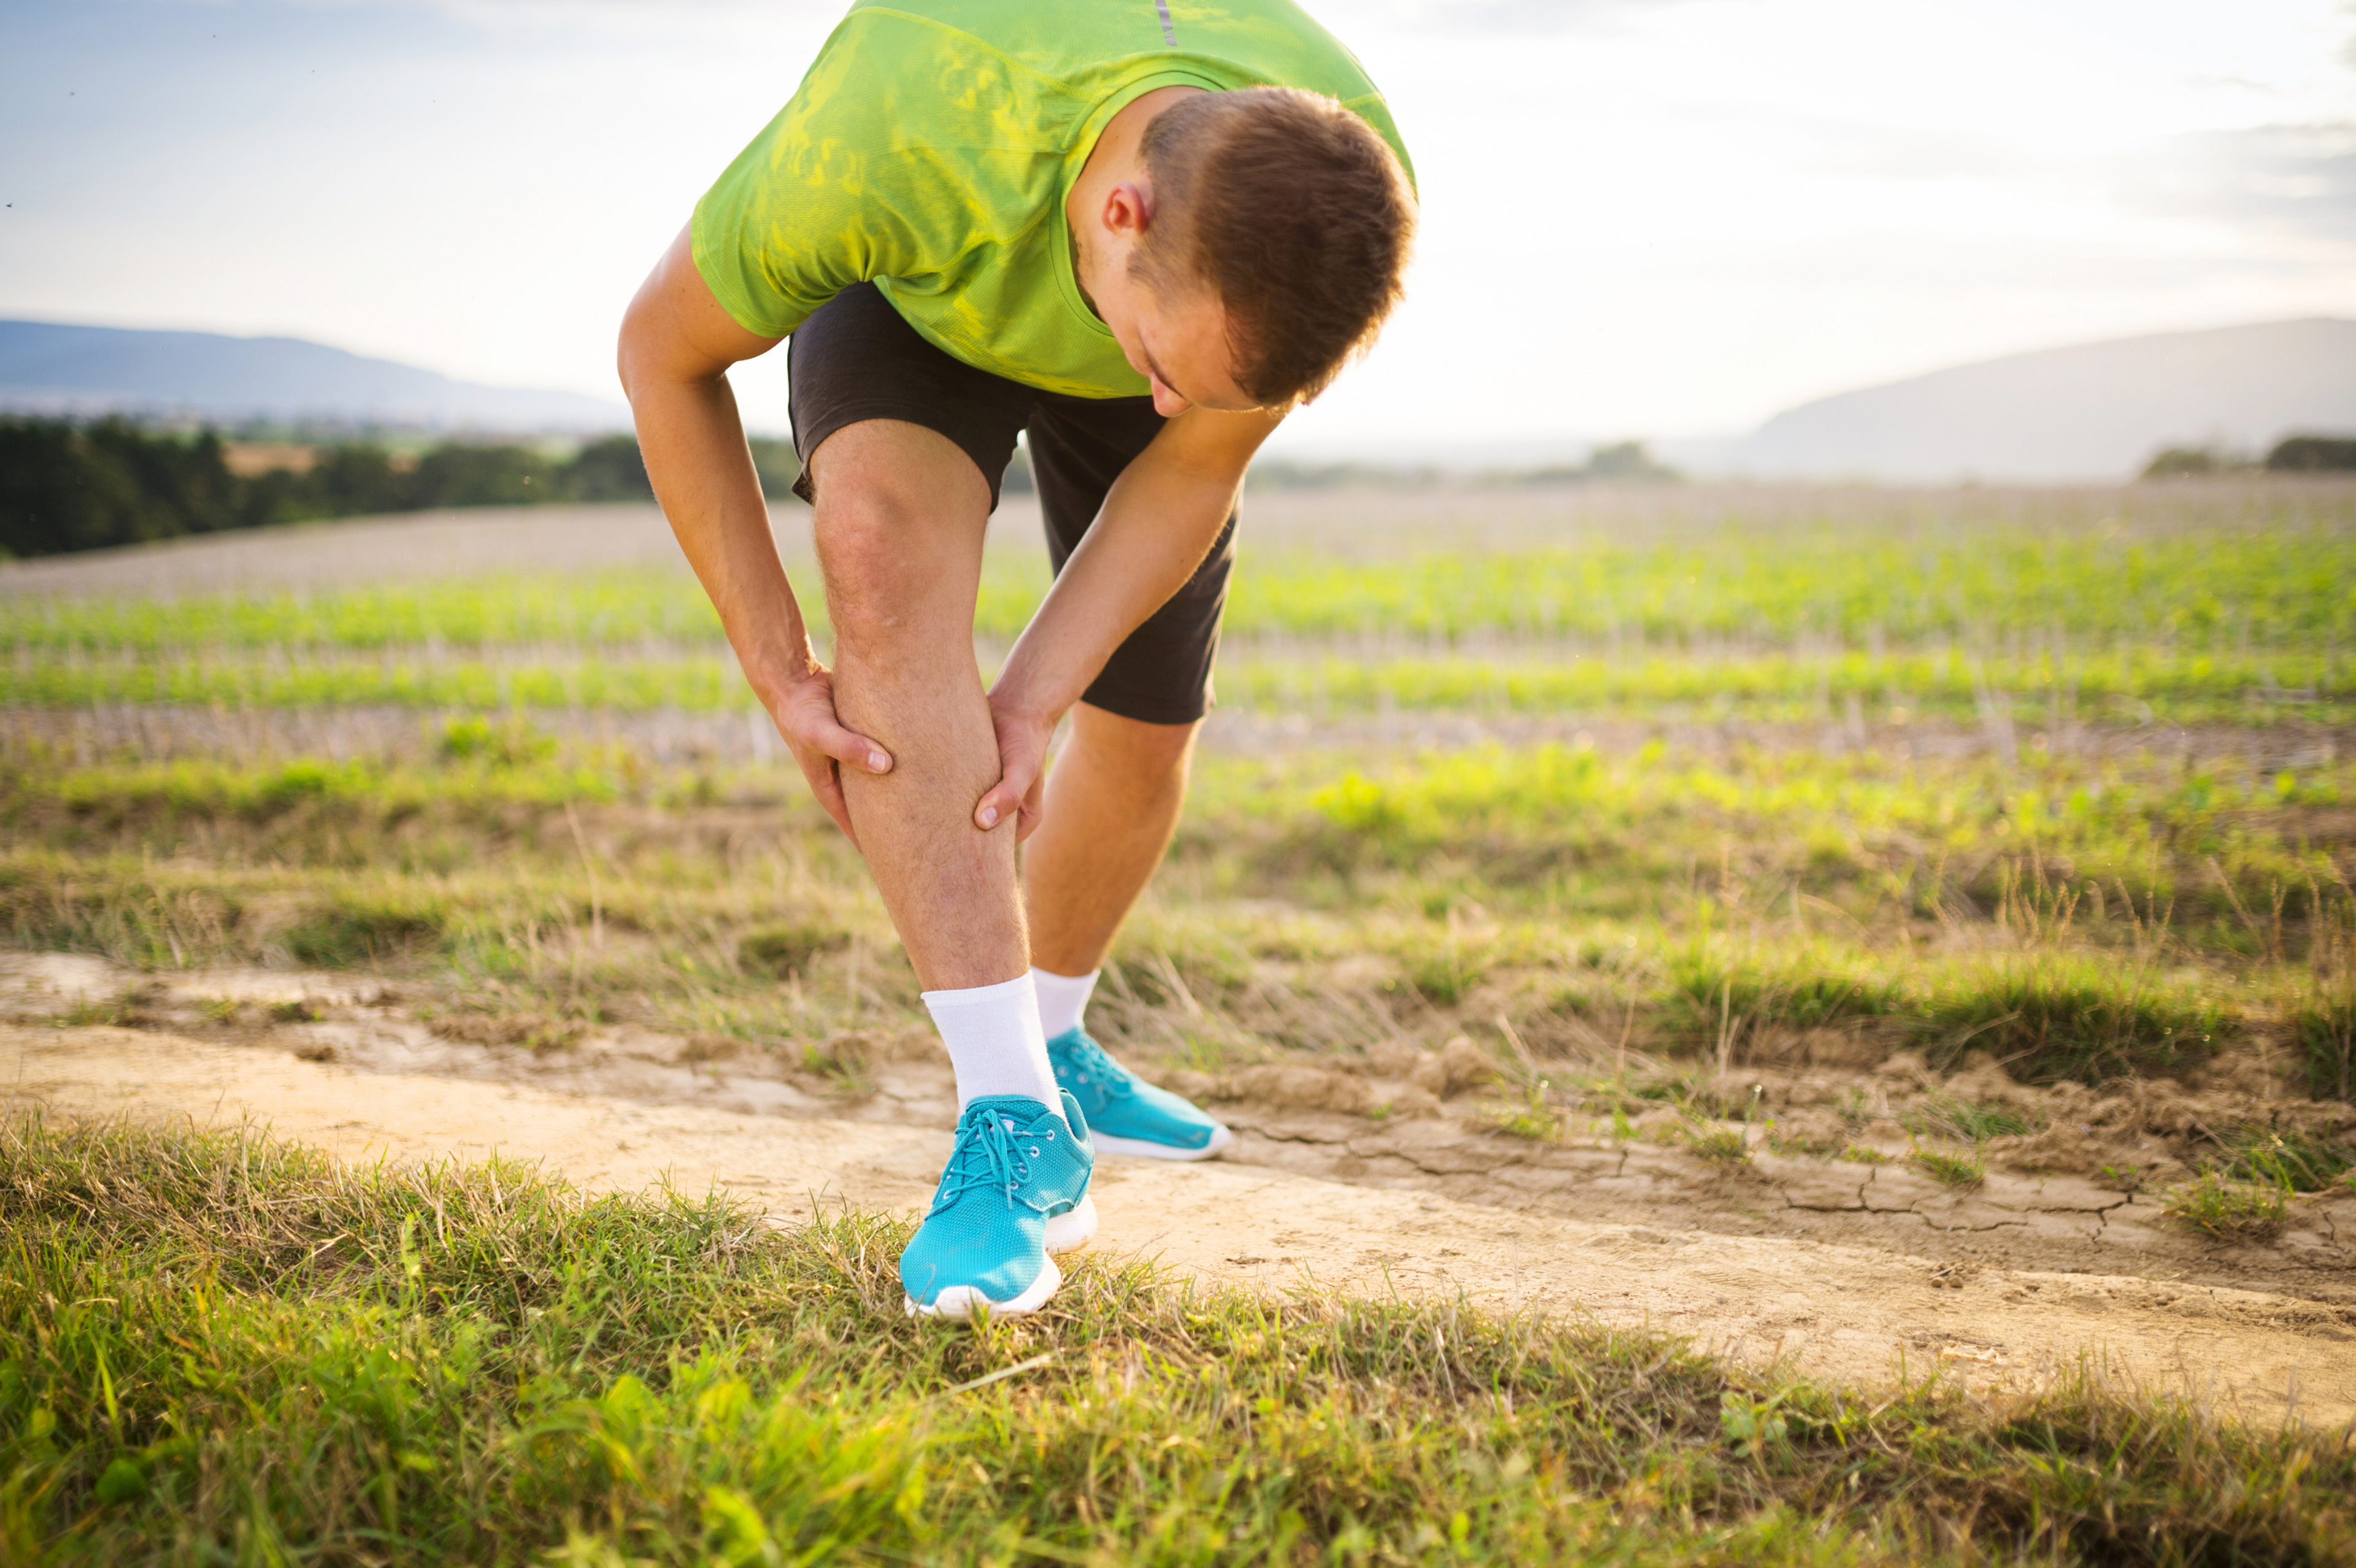 The most common calf strain symptom is feeling a sudden sharp pain in your calf while doing an activity.